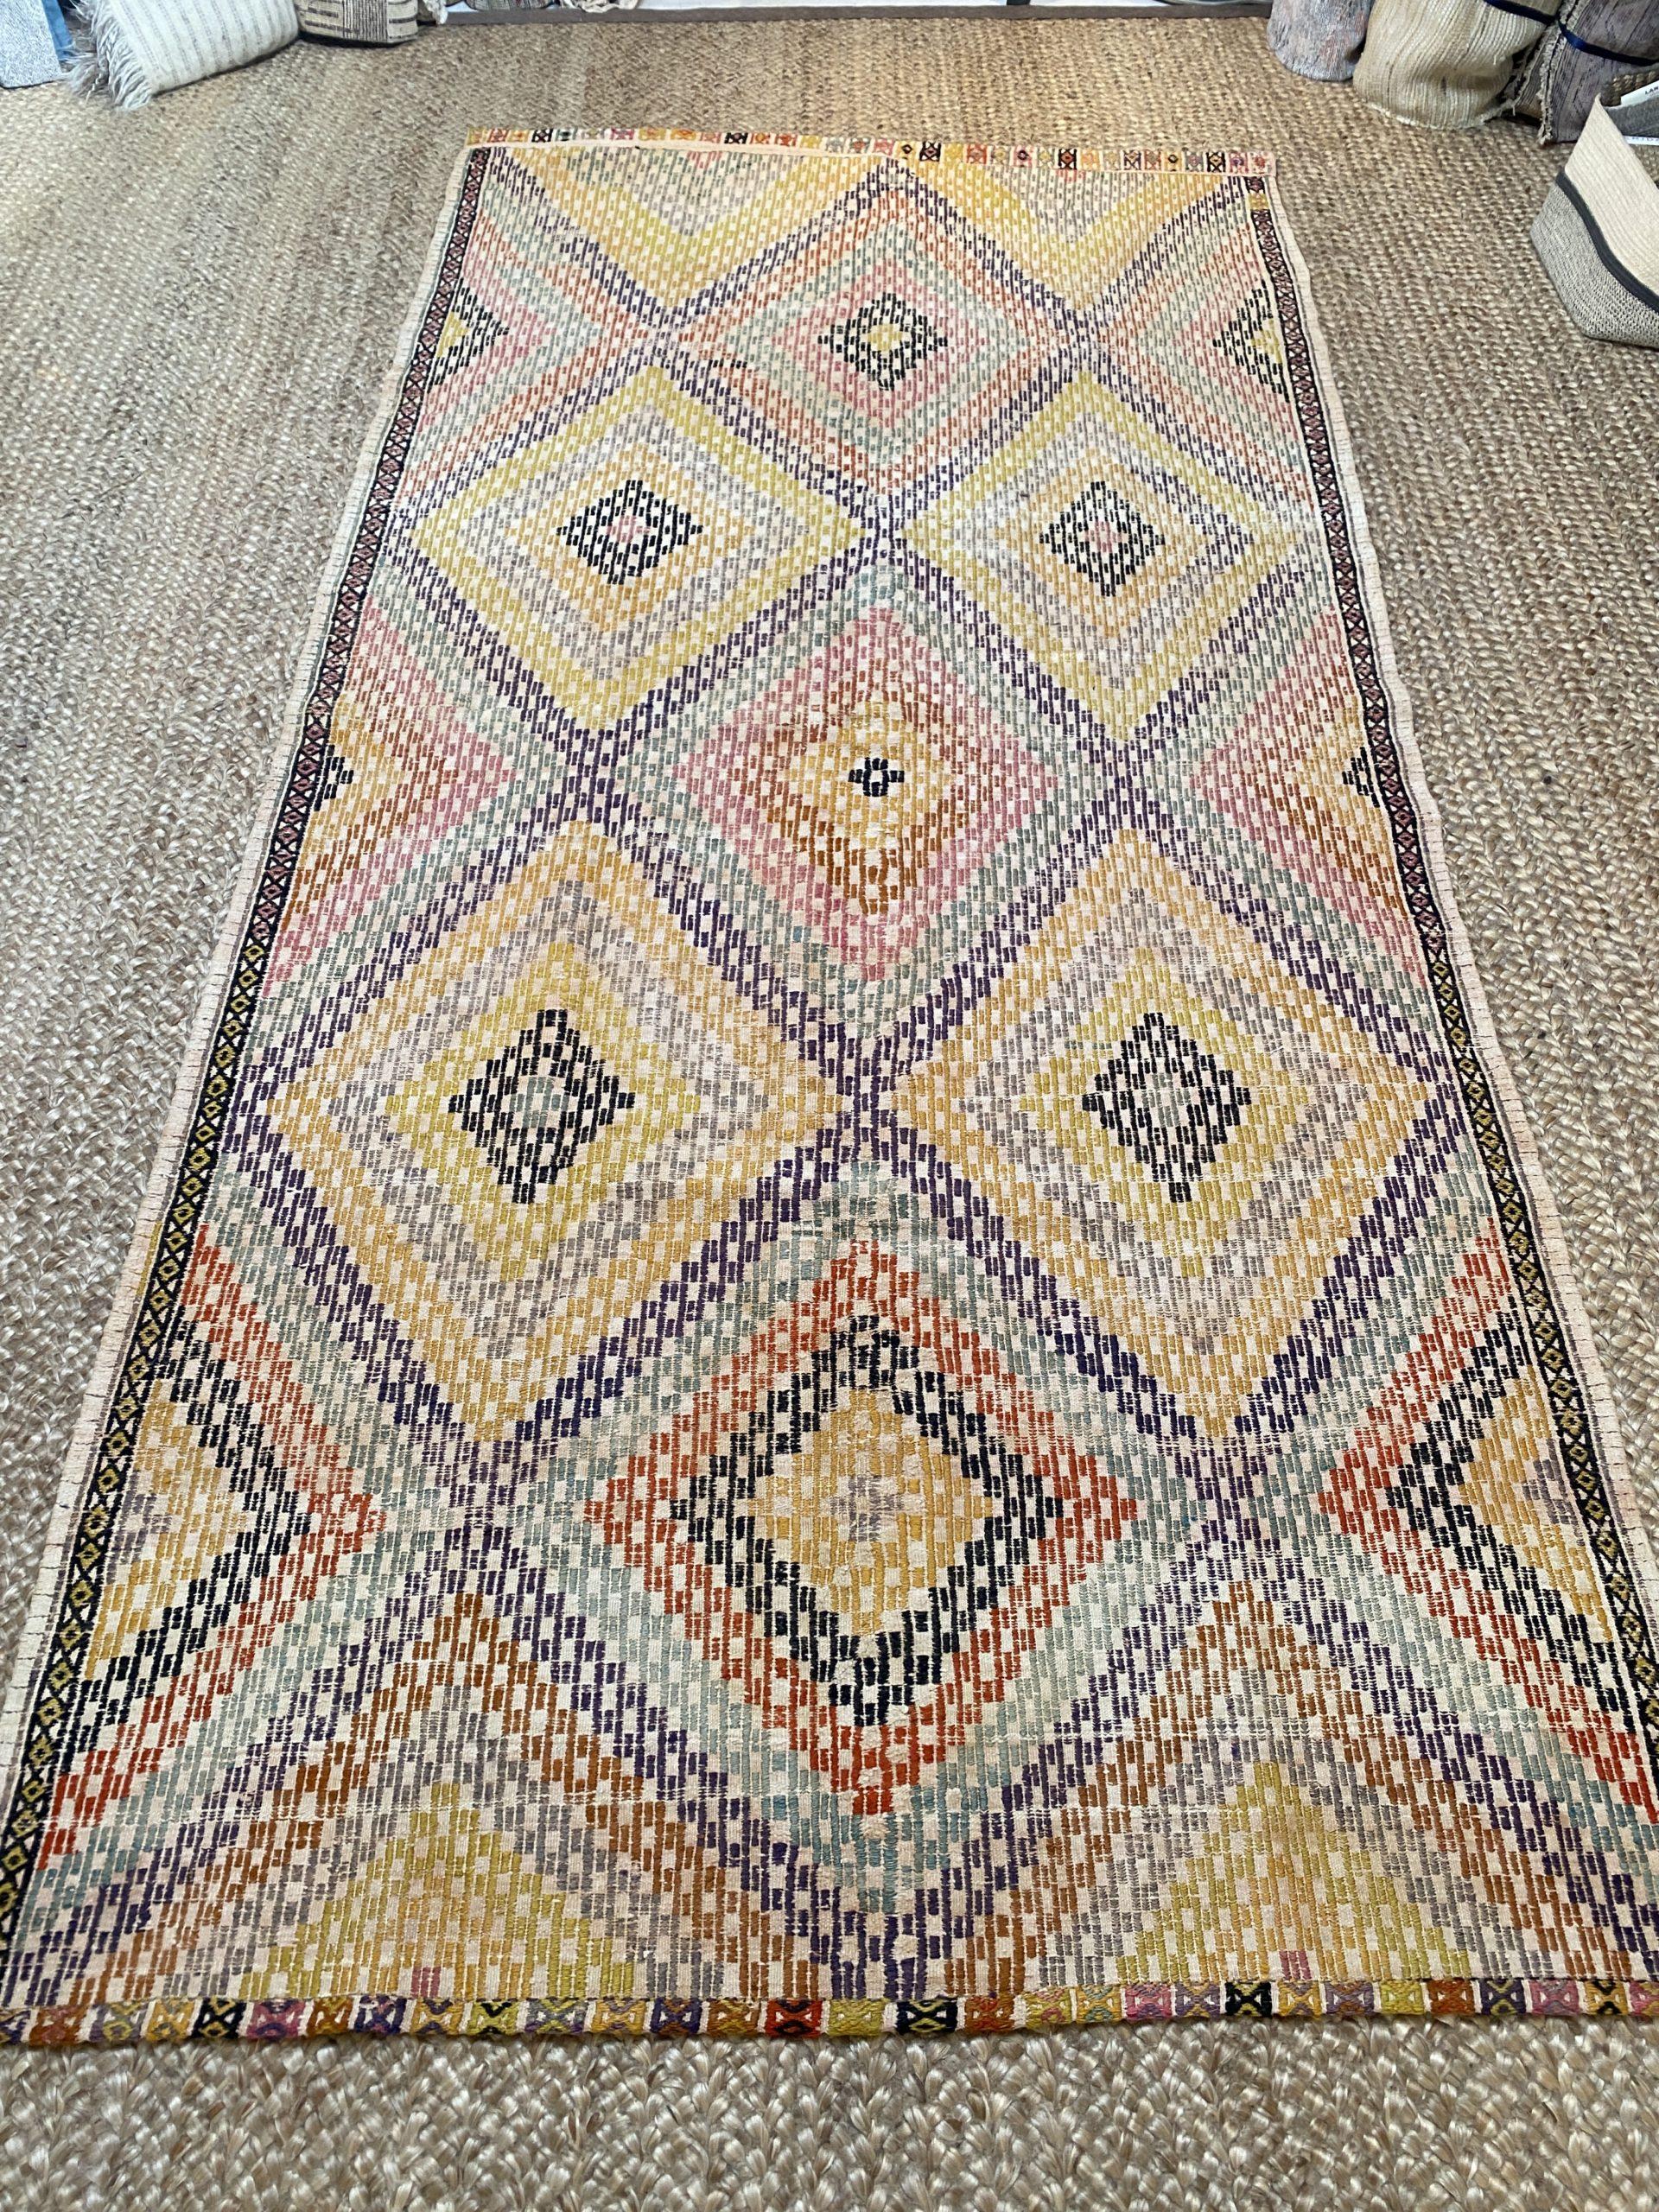 Origin: Turkey
Dimensions: 10’2? x 5'
Age: 1950’s
Design: Jajim
Material: 100% Wool Flatweave
Color: Yellow, Purple, Pink, Orange, Mint

 K6757

Jajim is a thin, handmade carpet full of pattern and woven horizontally. The name is derived